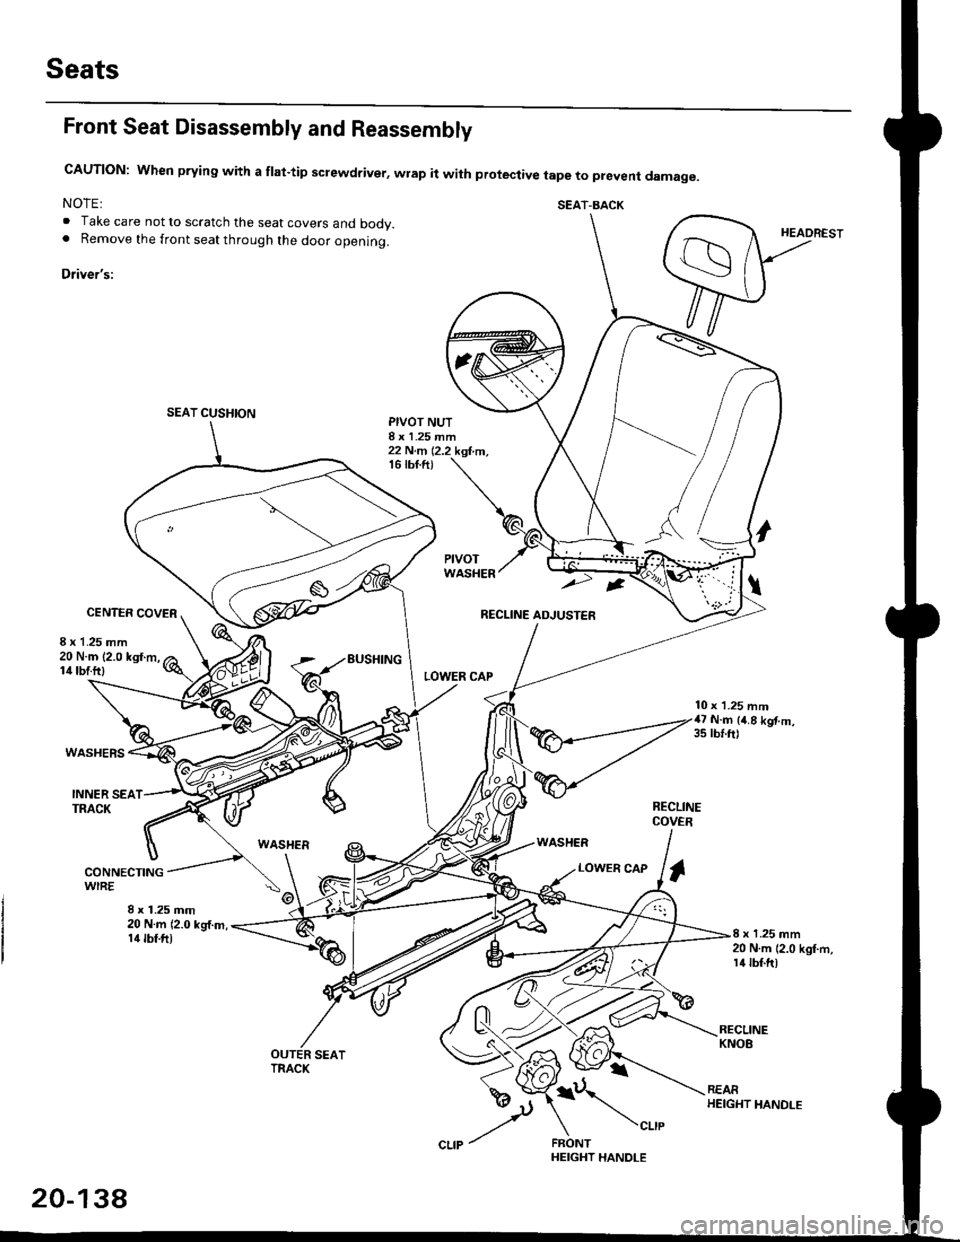 HONDA CIVIC 1997 6.G Workshop Manual Seats
Front Seat Disassembly and Reassembly
CAUTION: When prying with a flat-tip screwdriver, wrap it with protective tape to prevent damage.
NOTE: SEAT-BACK. Take care not to scratch the seat covers 